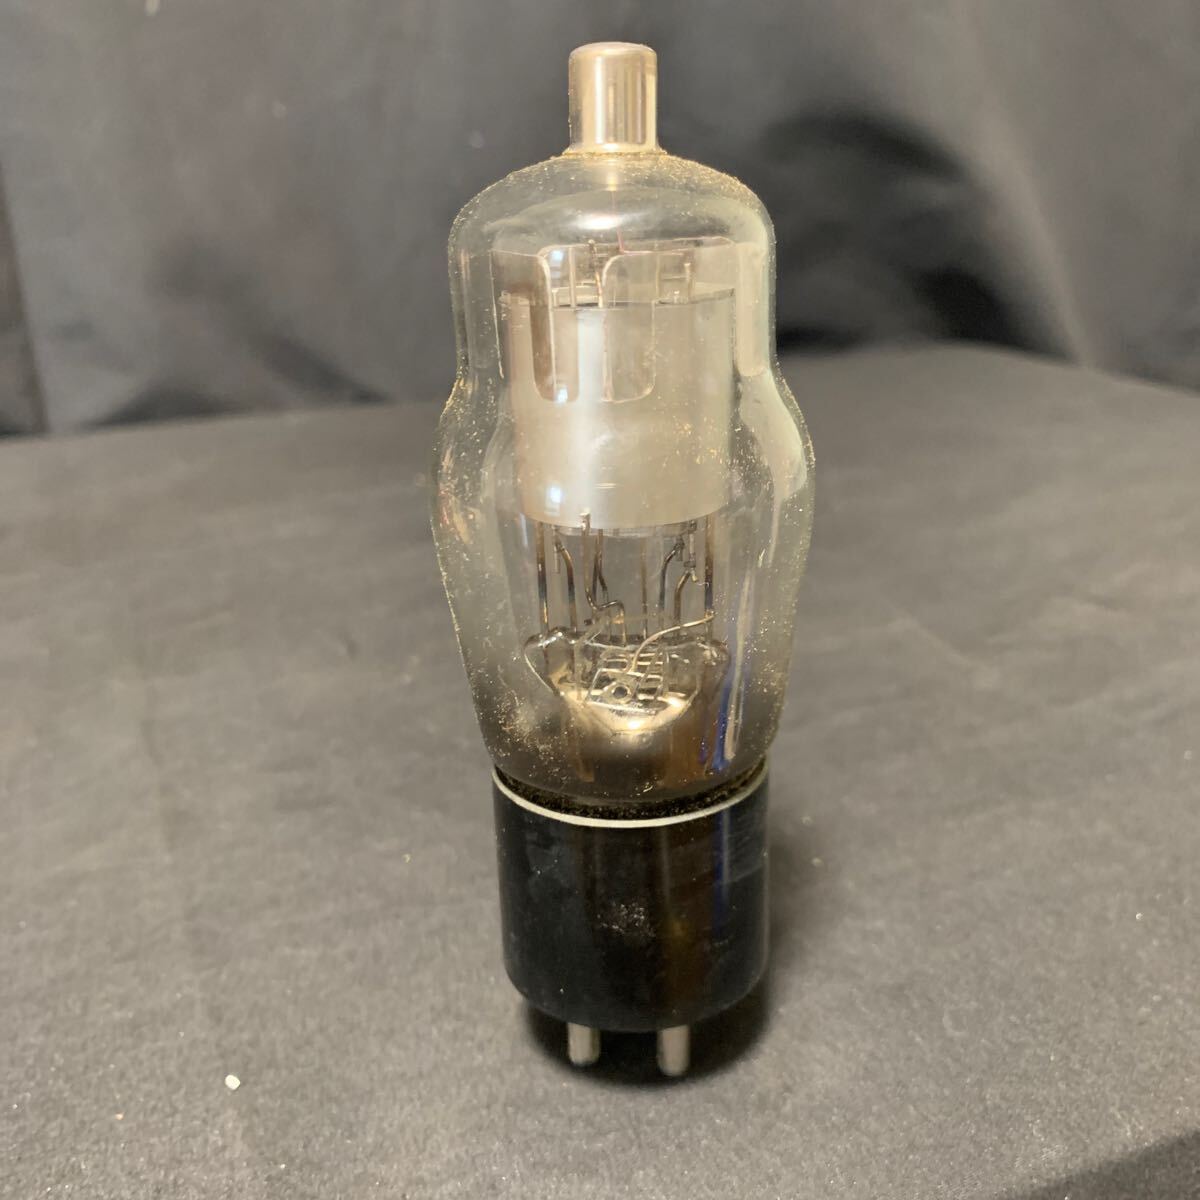 ELECTRON TUBE SUPPLIED BY RCA 米国製 しん真空管 箱入り 34 CL-14 (3-46) 元箱入り 